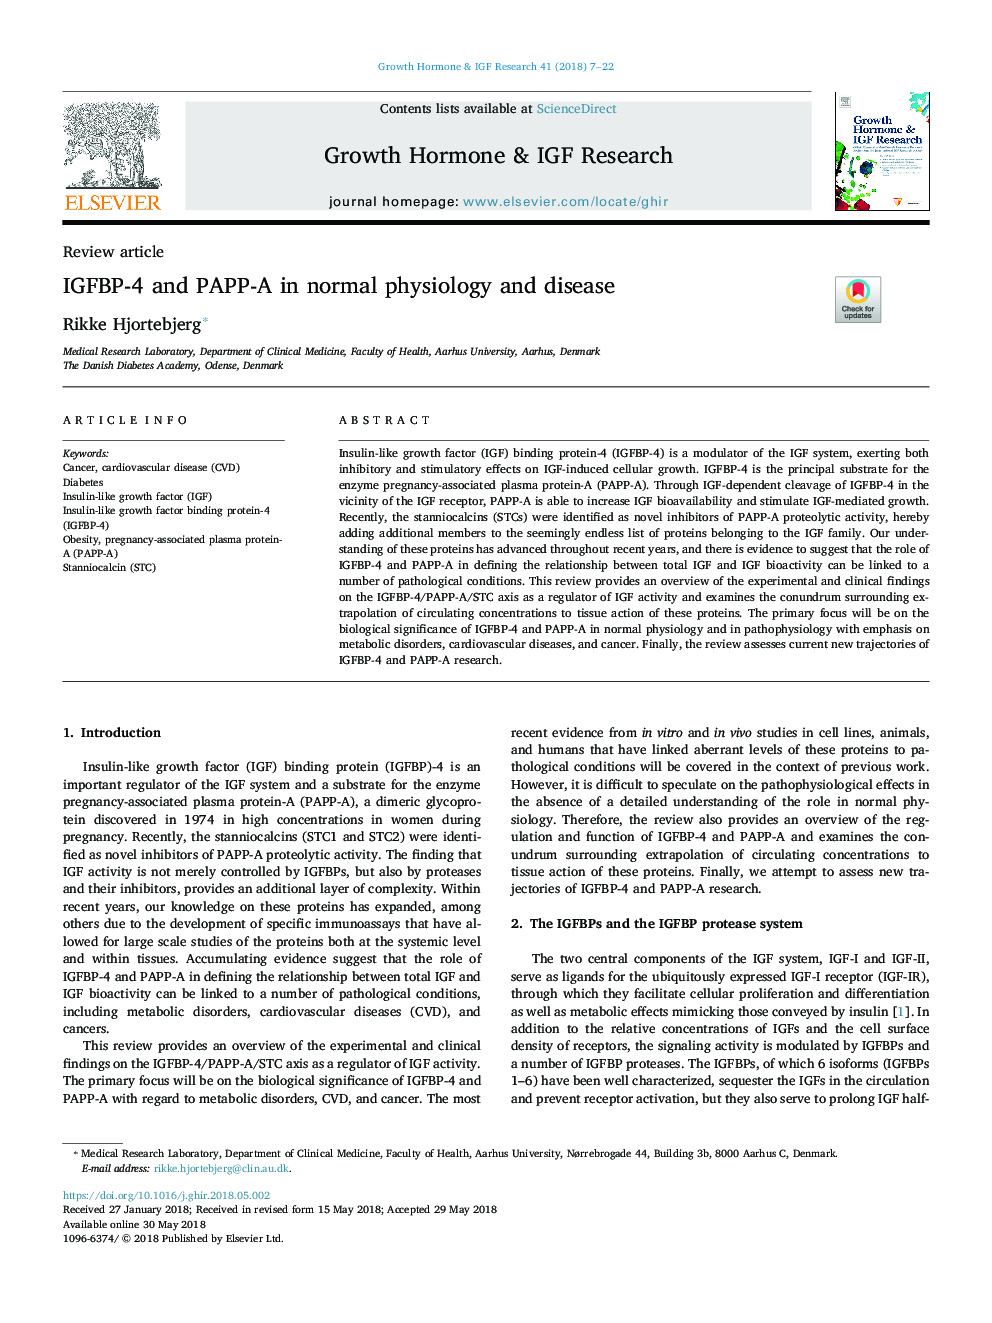 IGFBP-4 and PAPP-A in normal physiology and disease